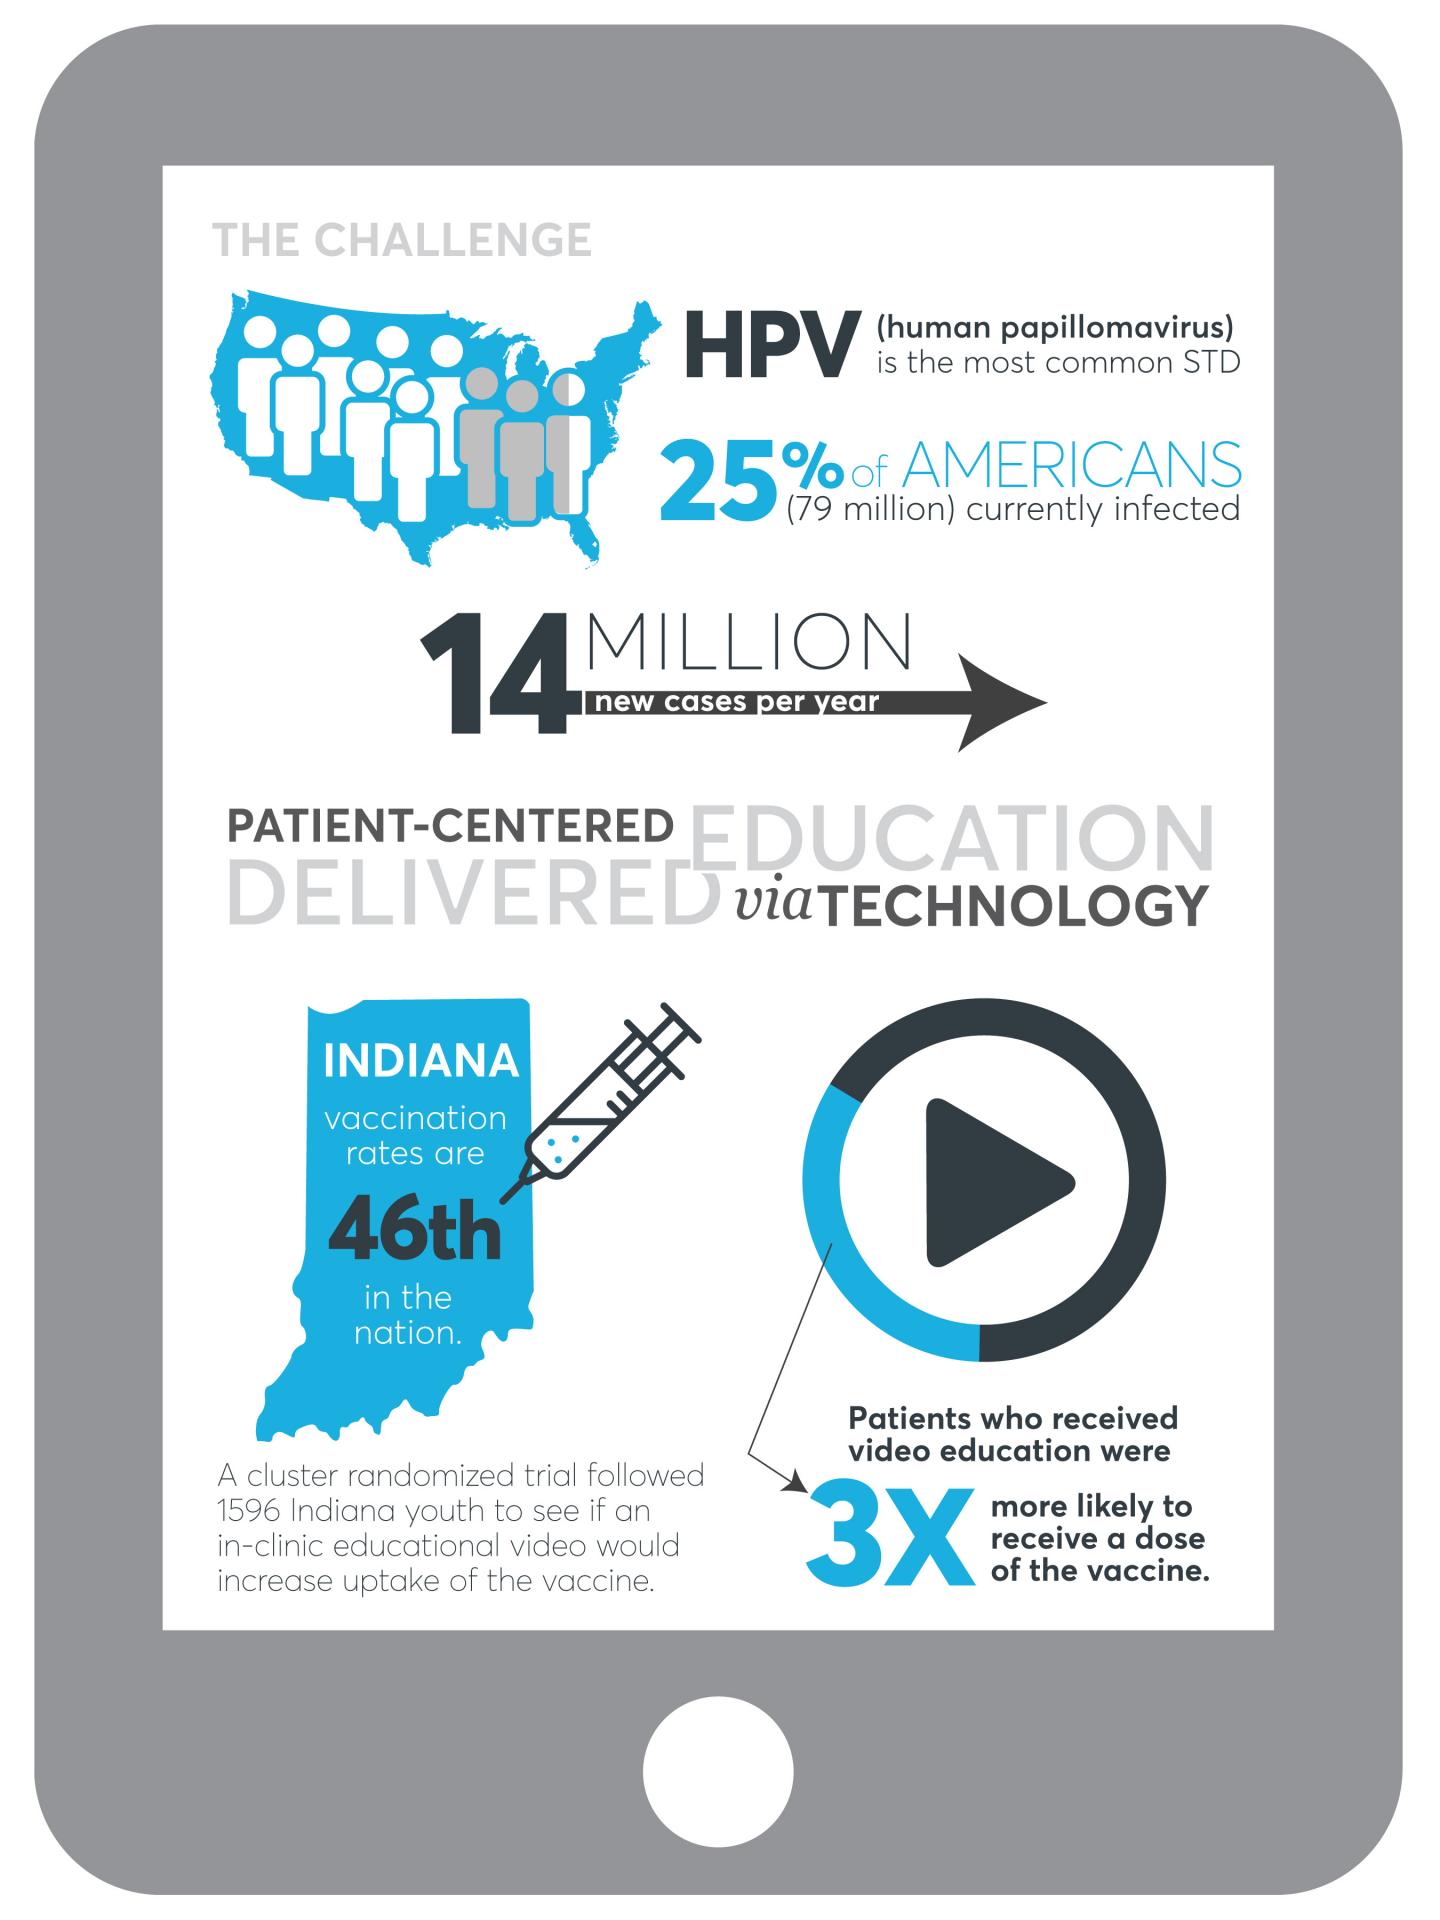 Educational Videos in Clinics Increased Adolescent HPV Vaccinations